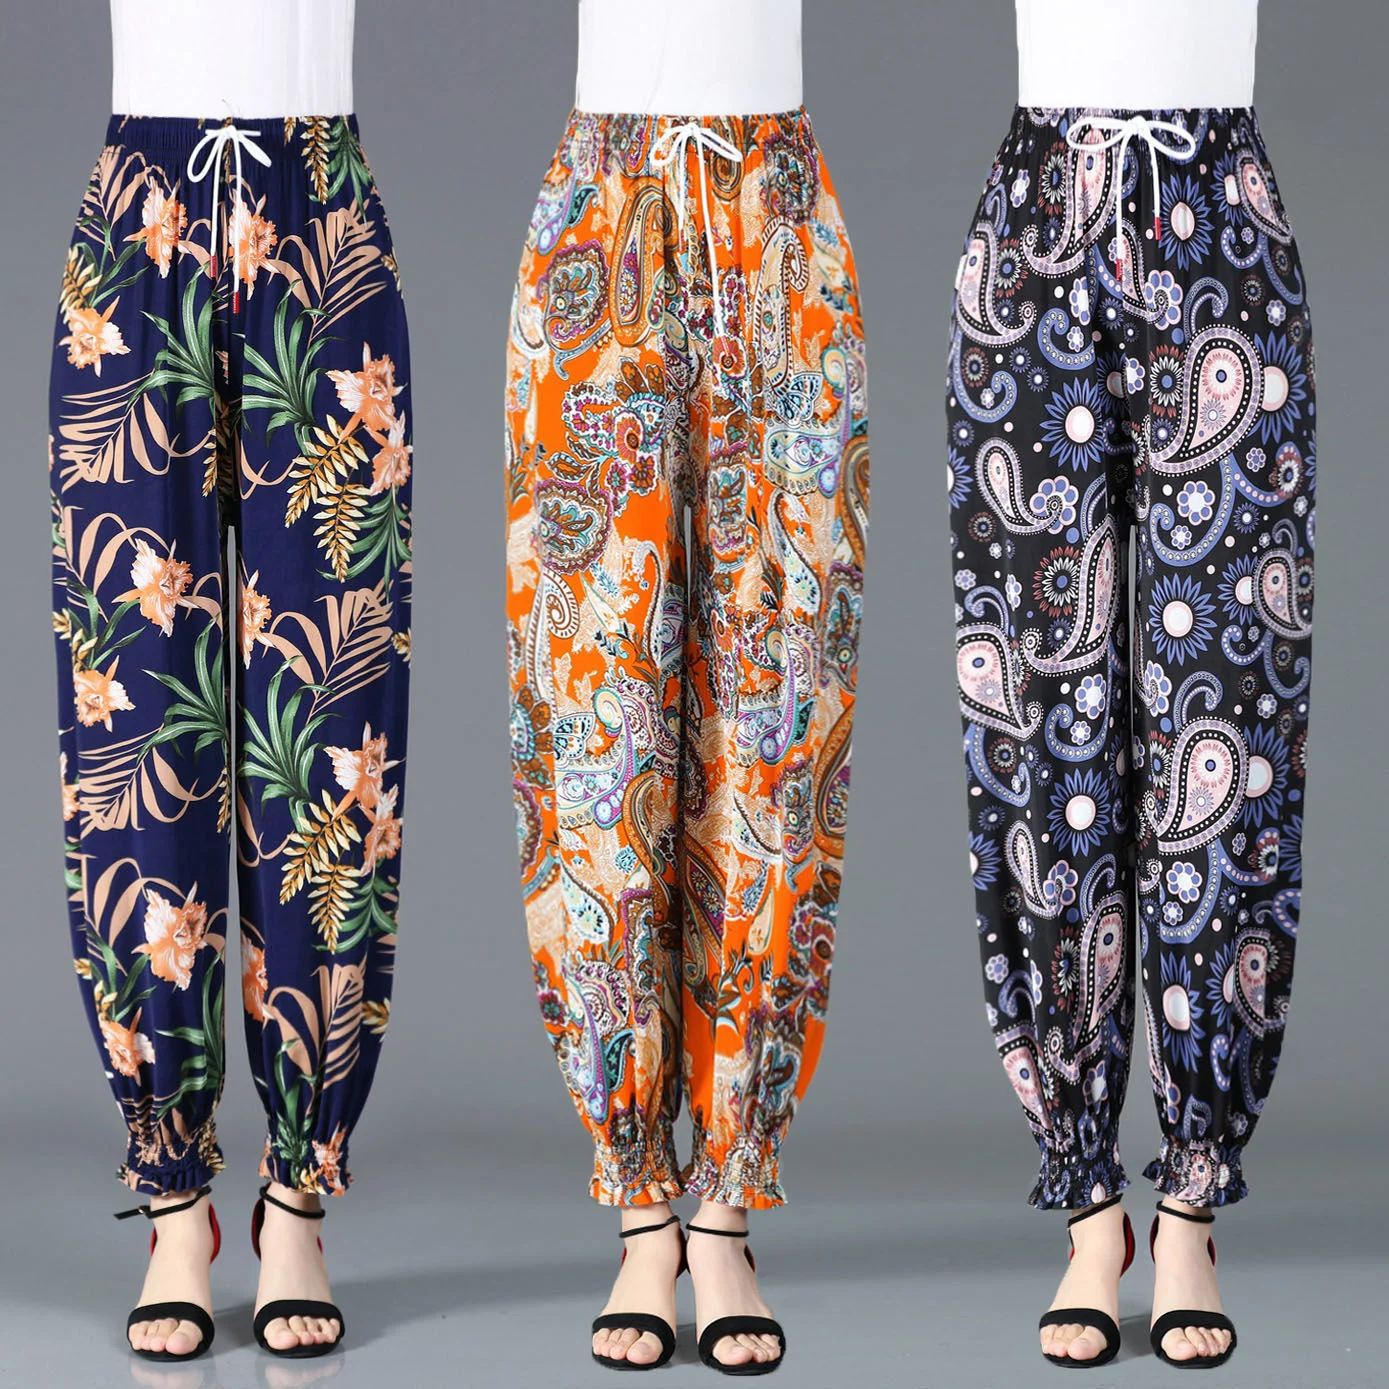 2023 Summer Middle-aged And Elderly Women's Cropped Pants Casual High Waist Printed Harem Trousers Female Bottoms